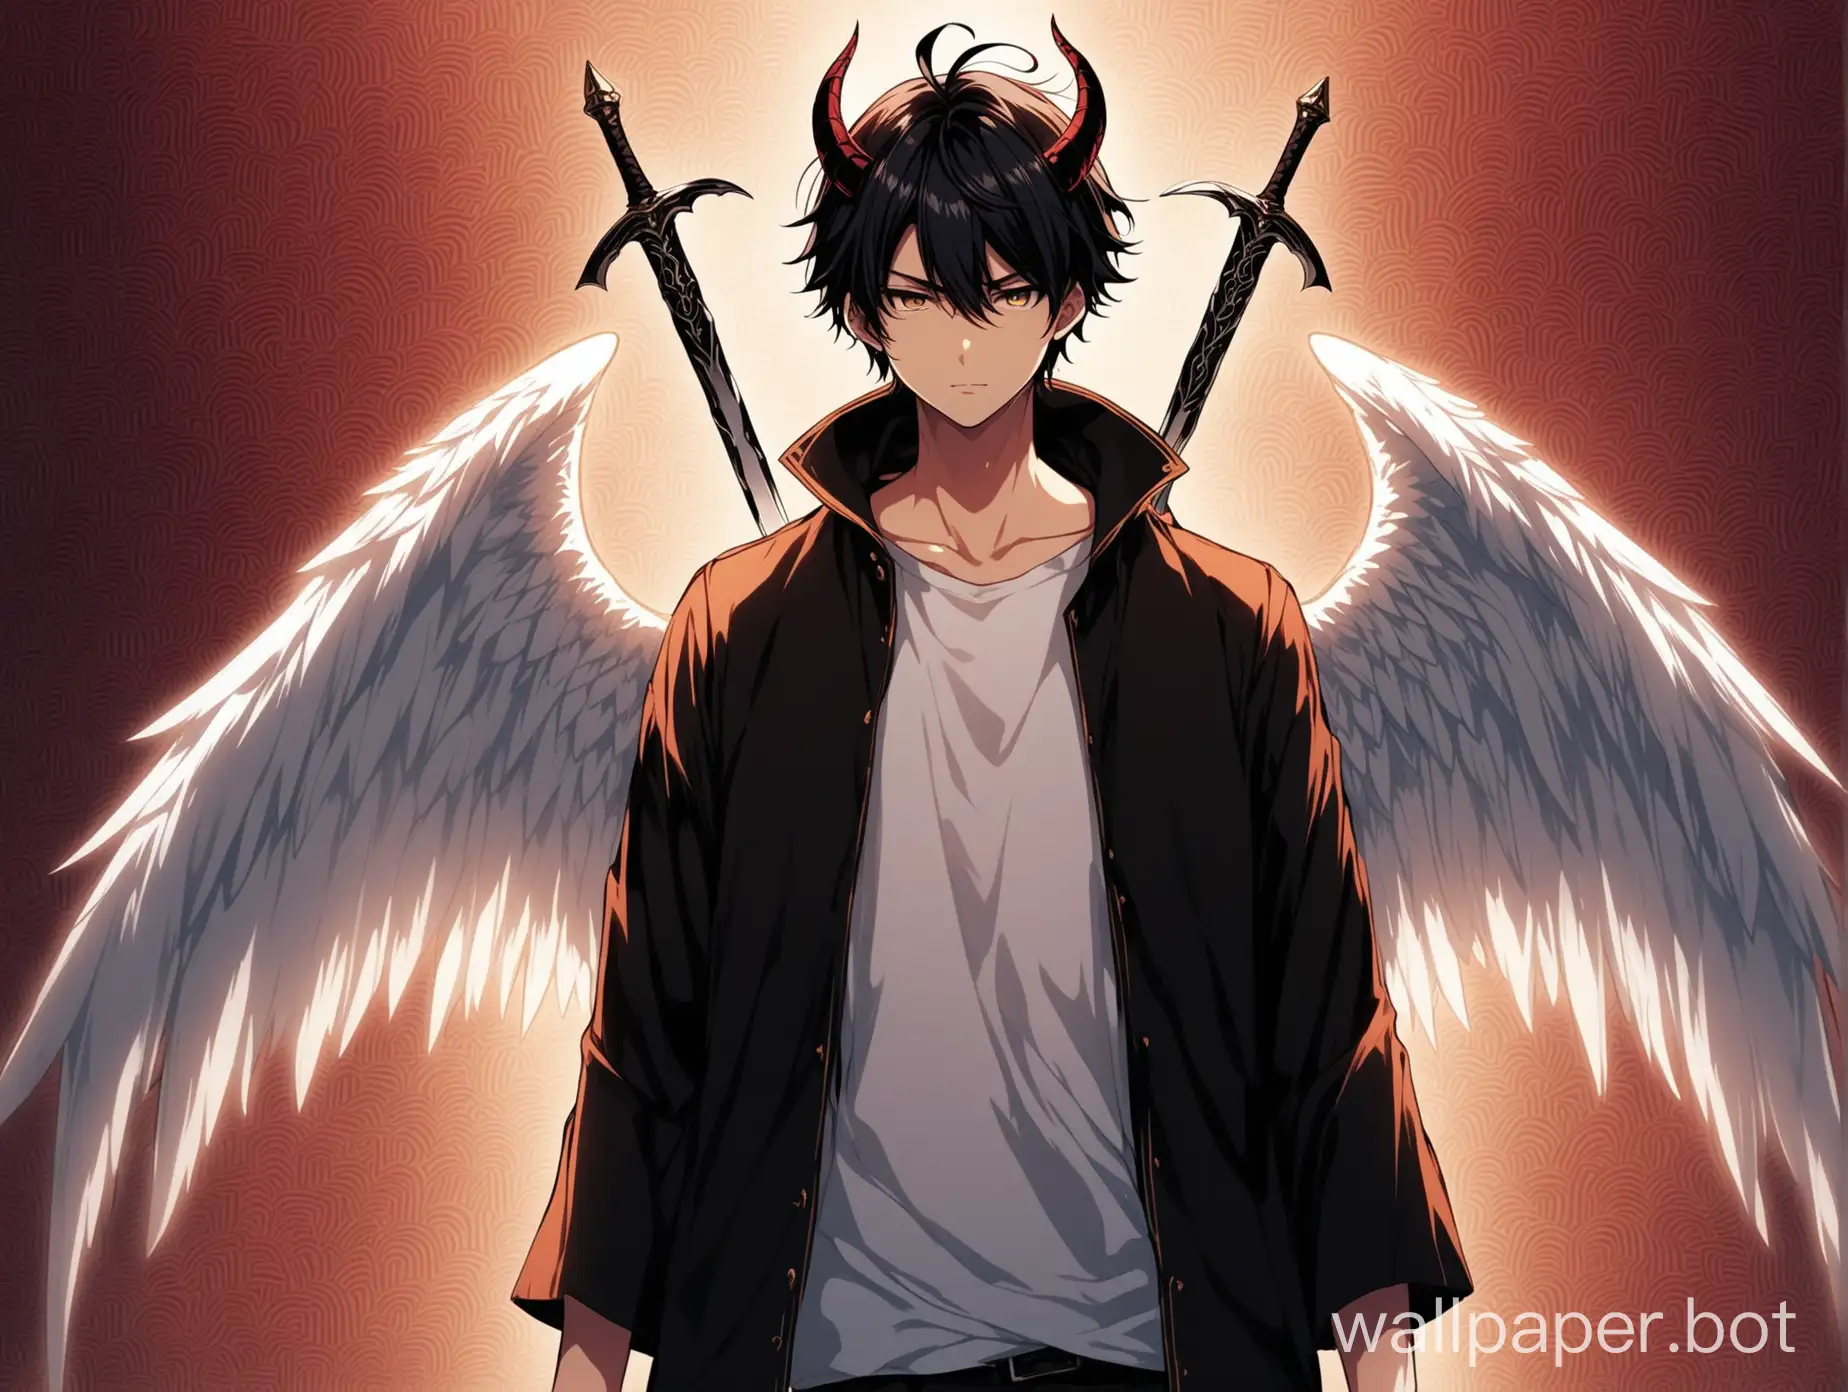 Anime-Landscape-Wallpaper-Dual-Blade-Warrior-Embracing-Angelic-and-Demonic-Dualities